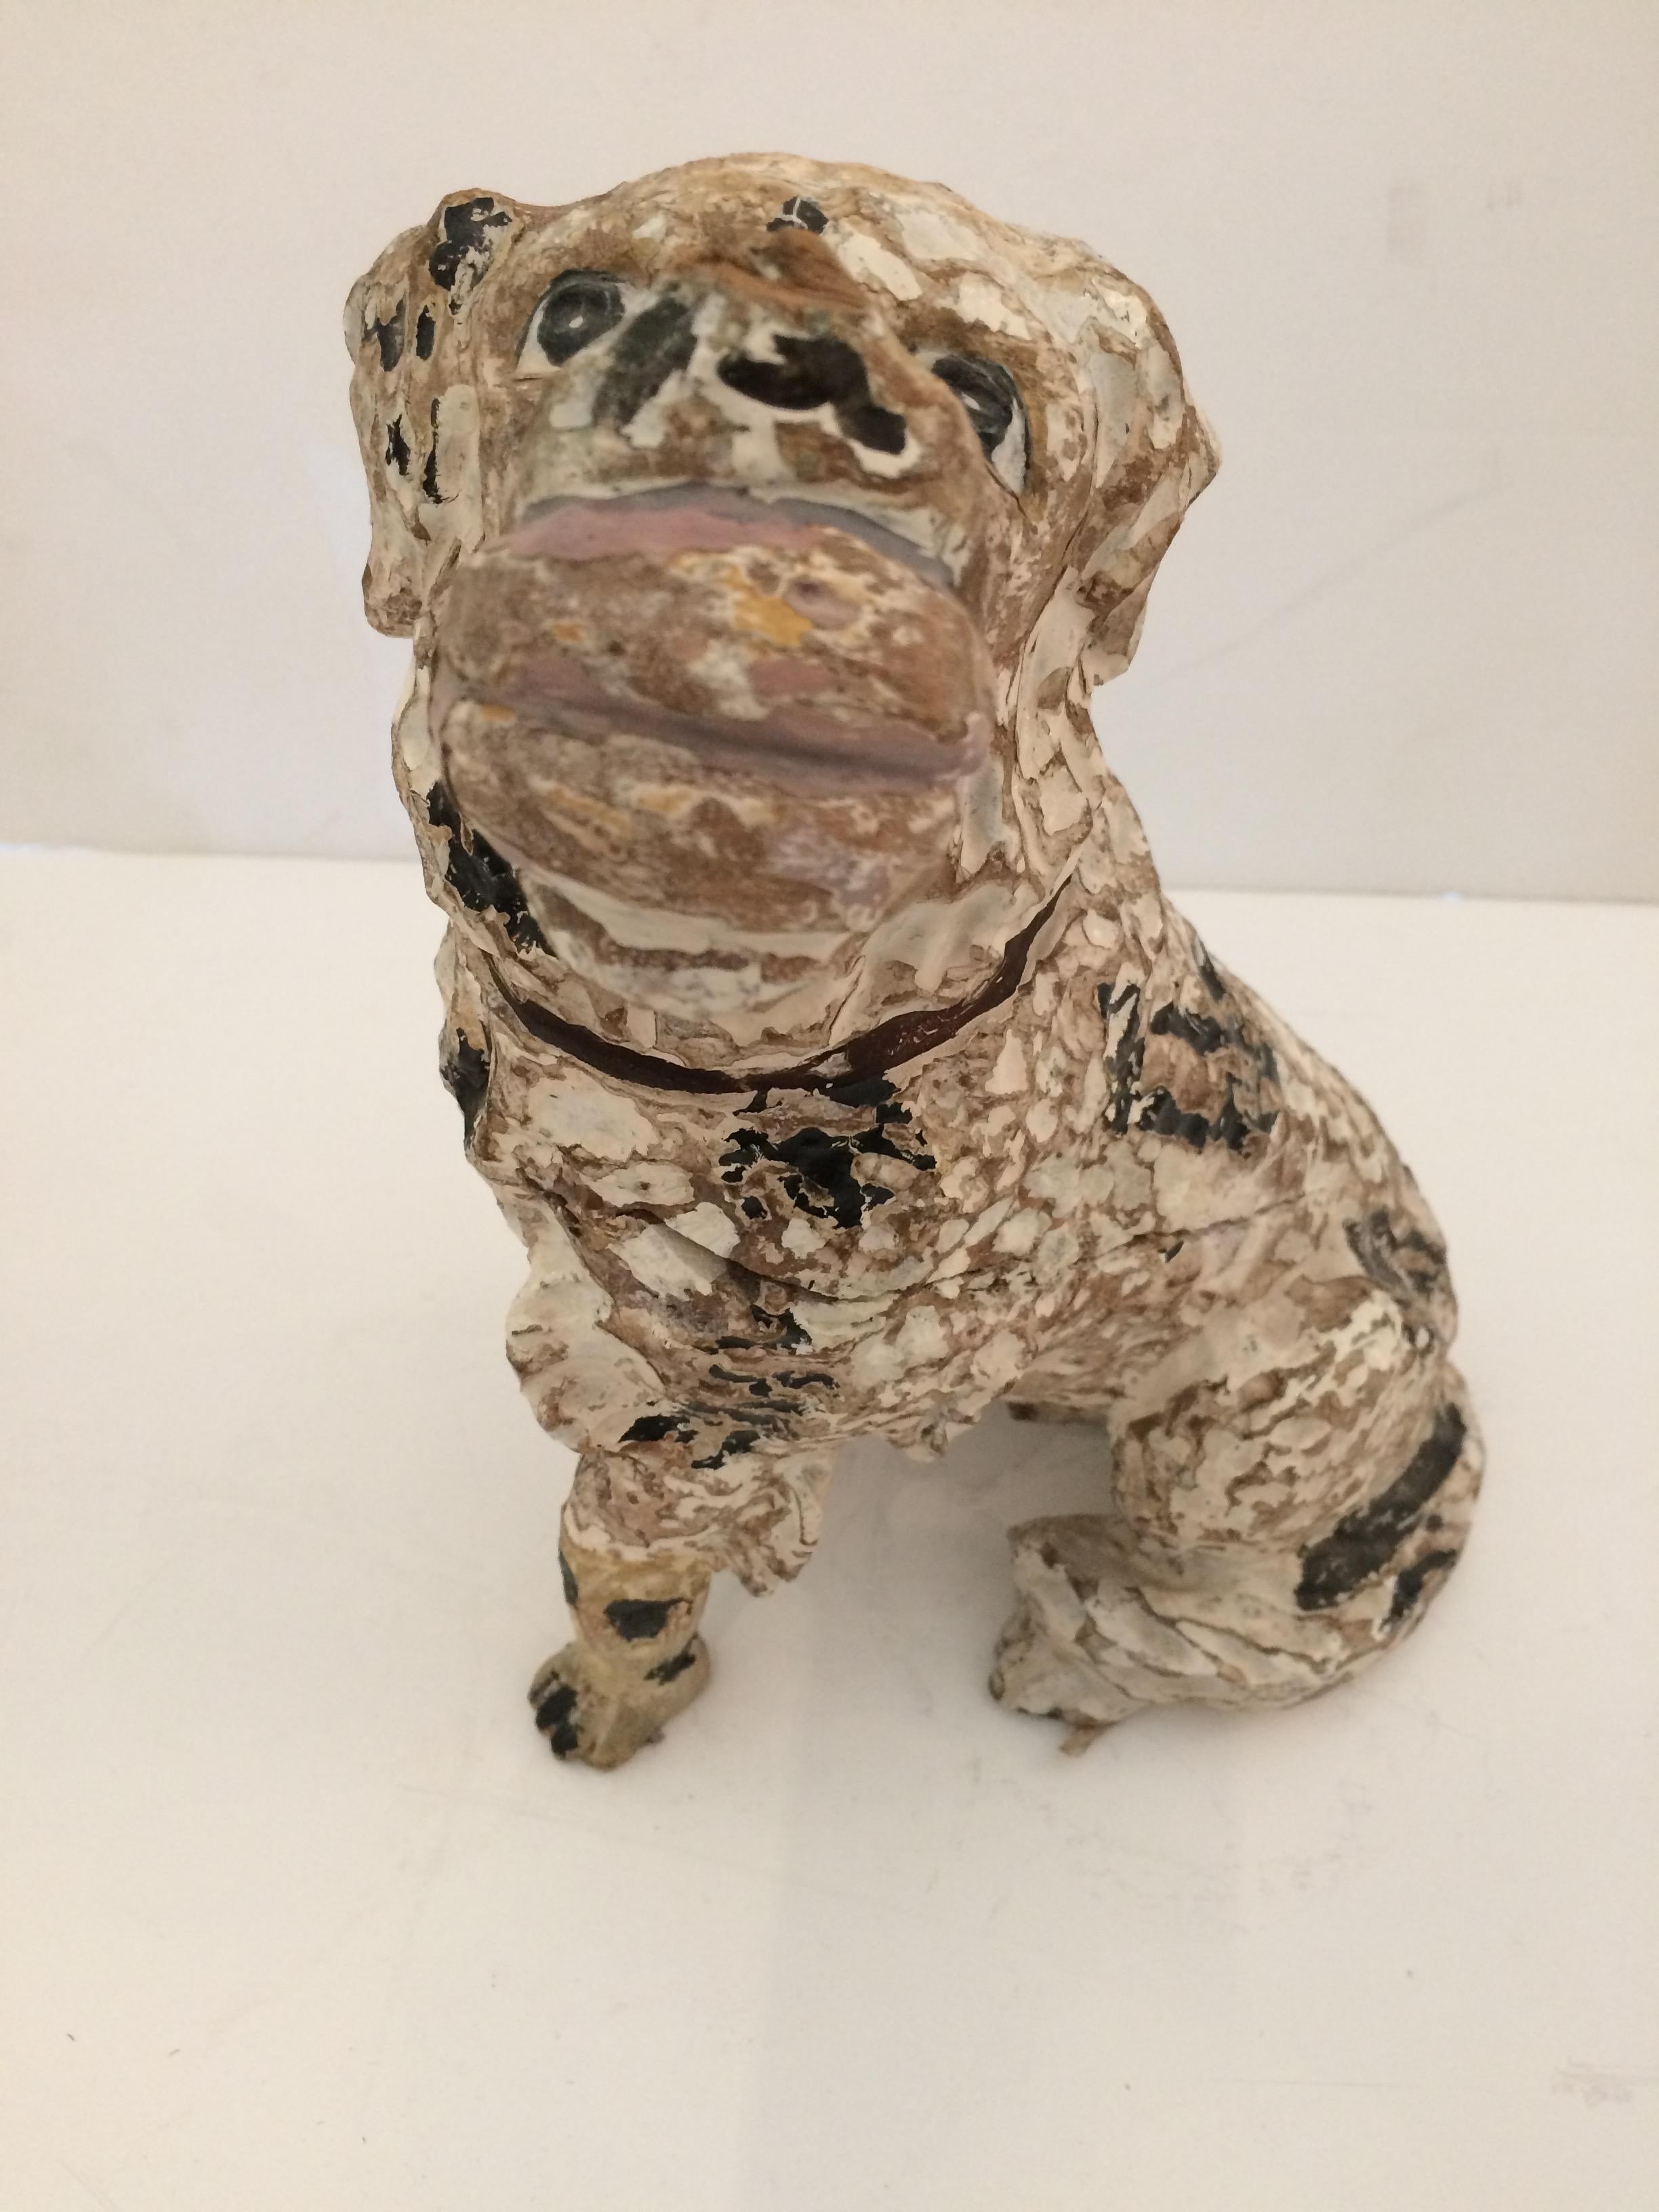 Folk Art Charming Carved Wood Rustic Dog Sculpture from Bakery Display